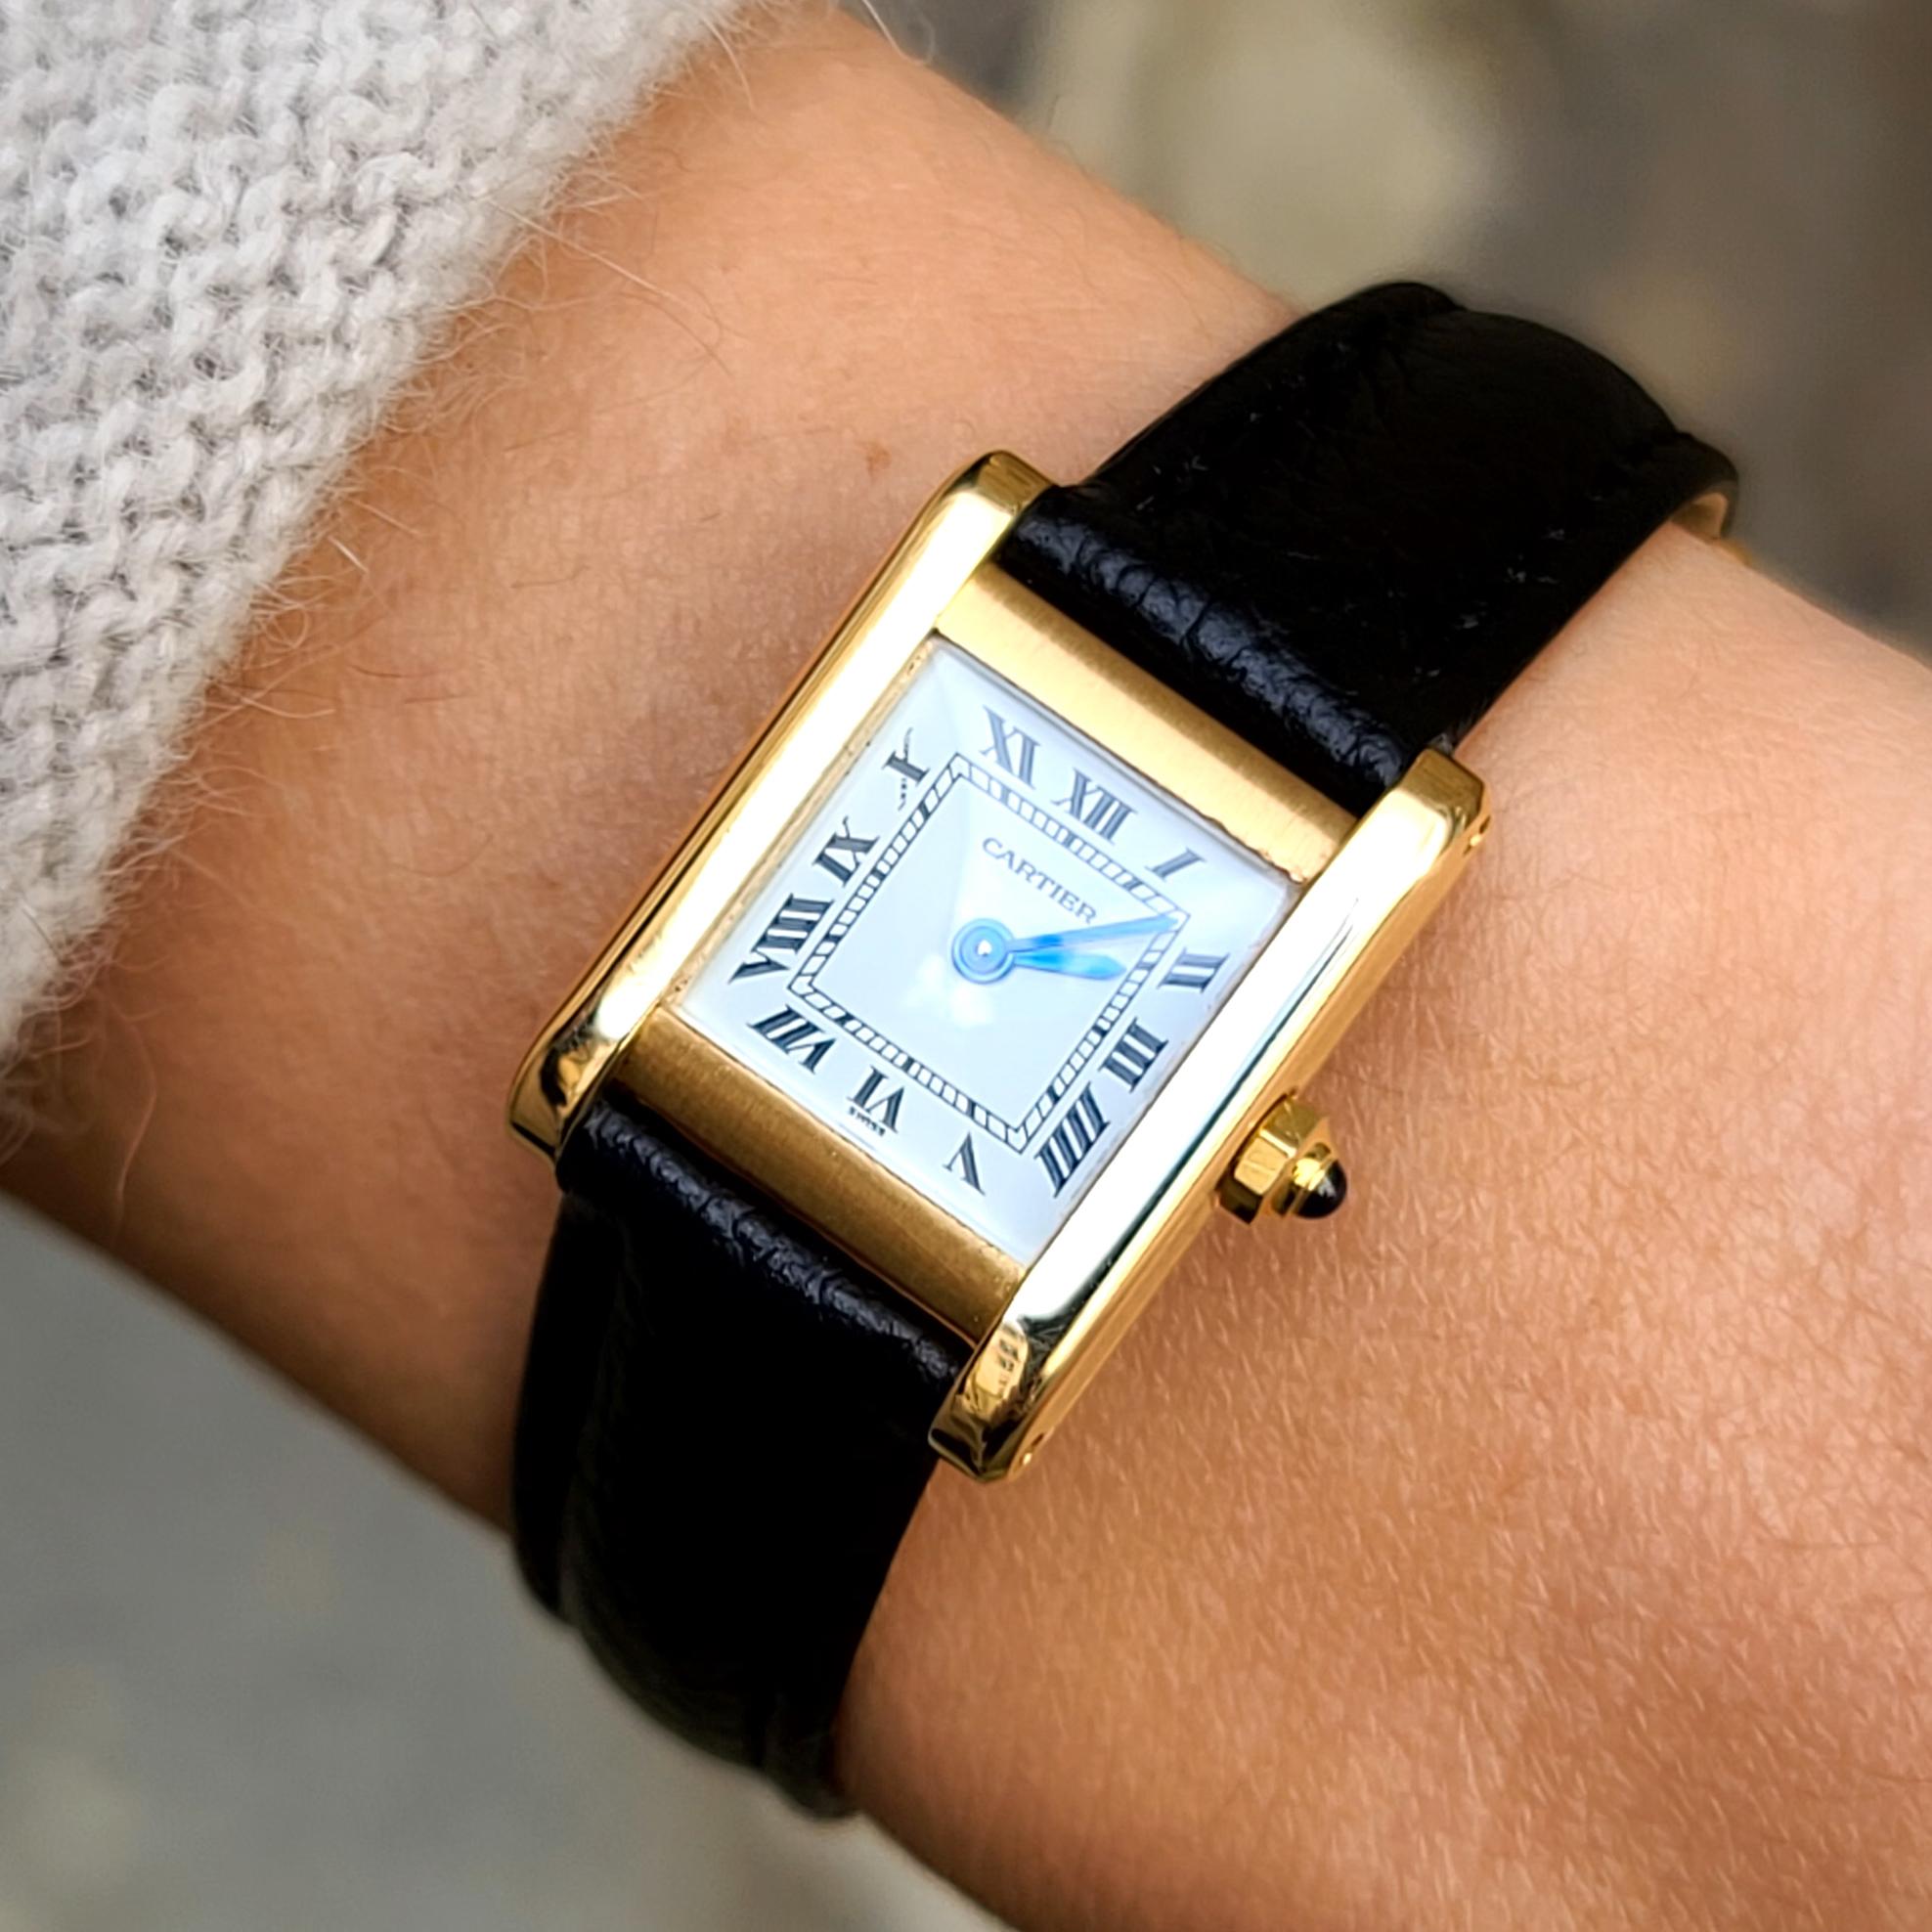 CARTIER
Founded in 1847

For the discerning few

Wear Cartier watch it's integrate the club of famous clients : Jackie Kennedy, Princess Diana, the Duchess of Windsor, Princess Grace, Barbara Hutton, Elizabeth Taylor, Andy Warhol, Yves Saint